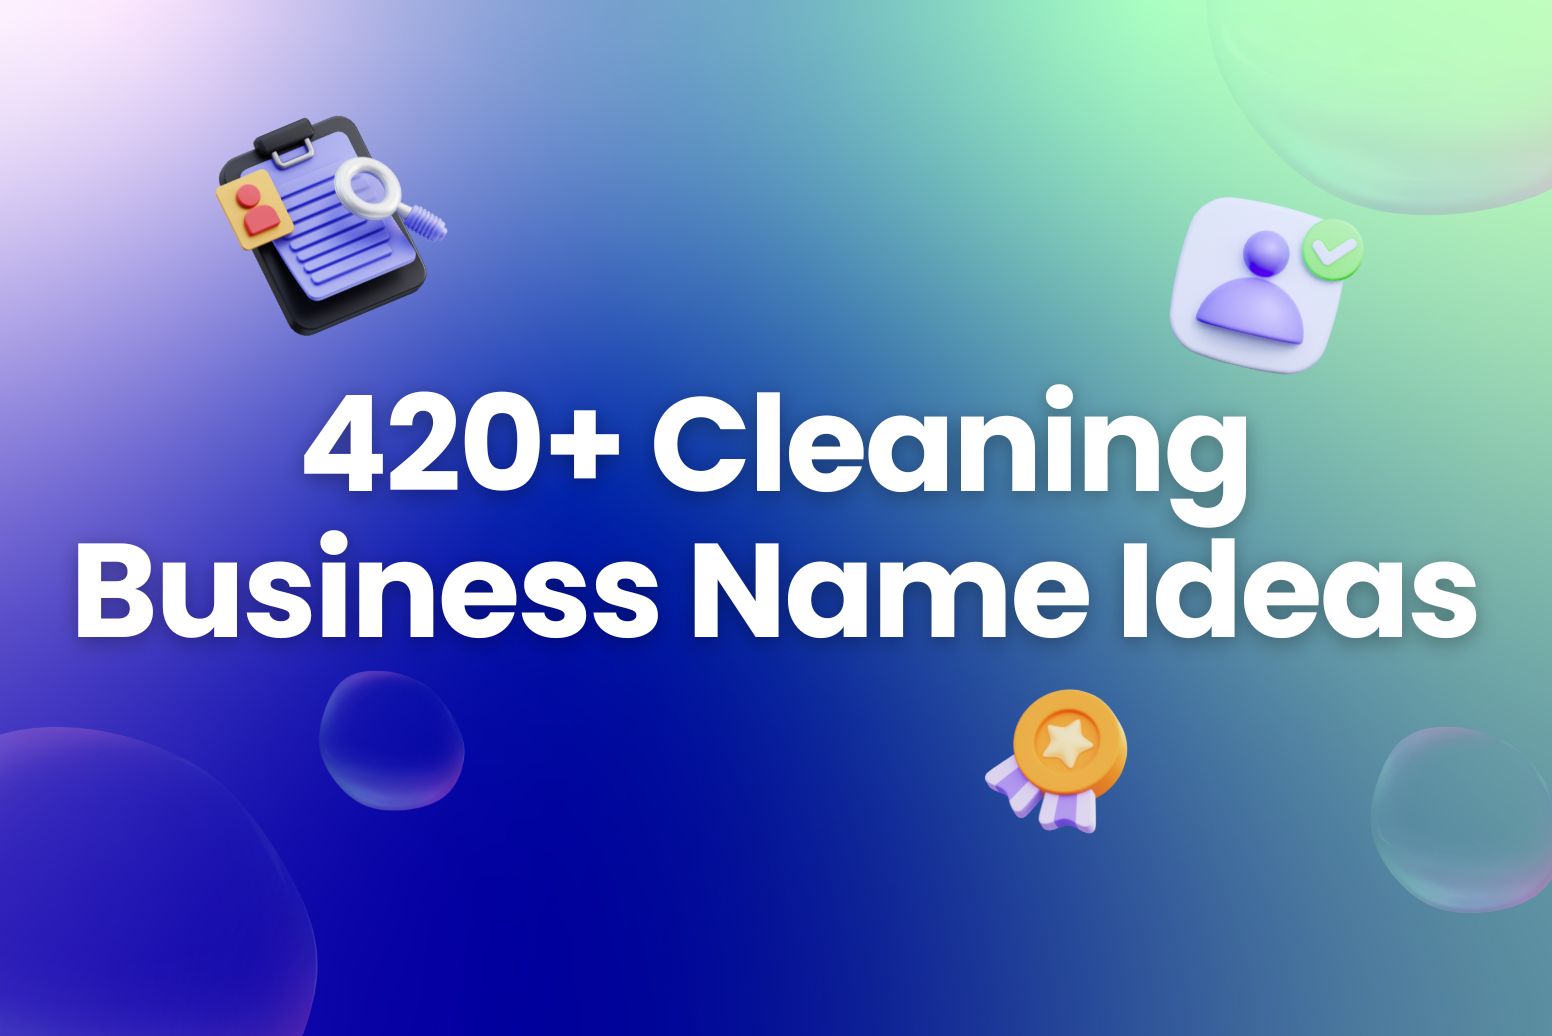 420+ Memorable Cleaning Business Name Ideas to Explore